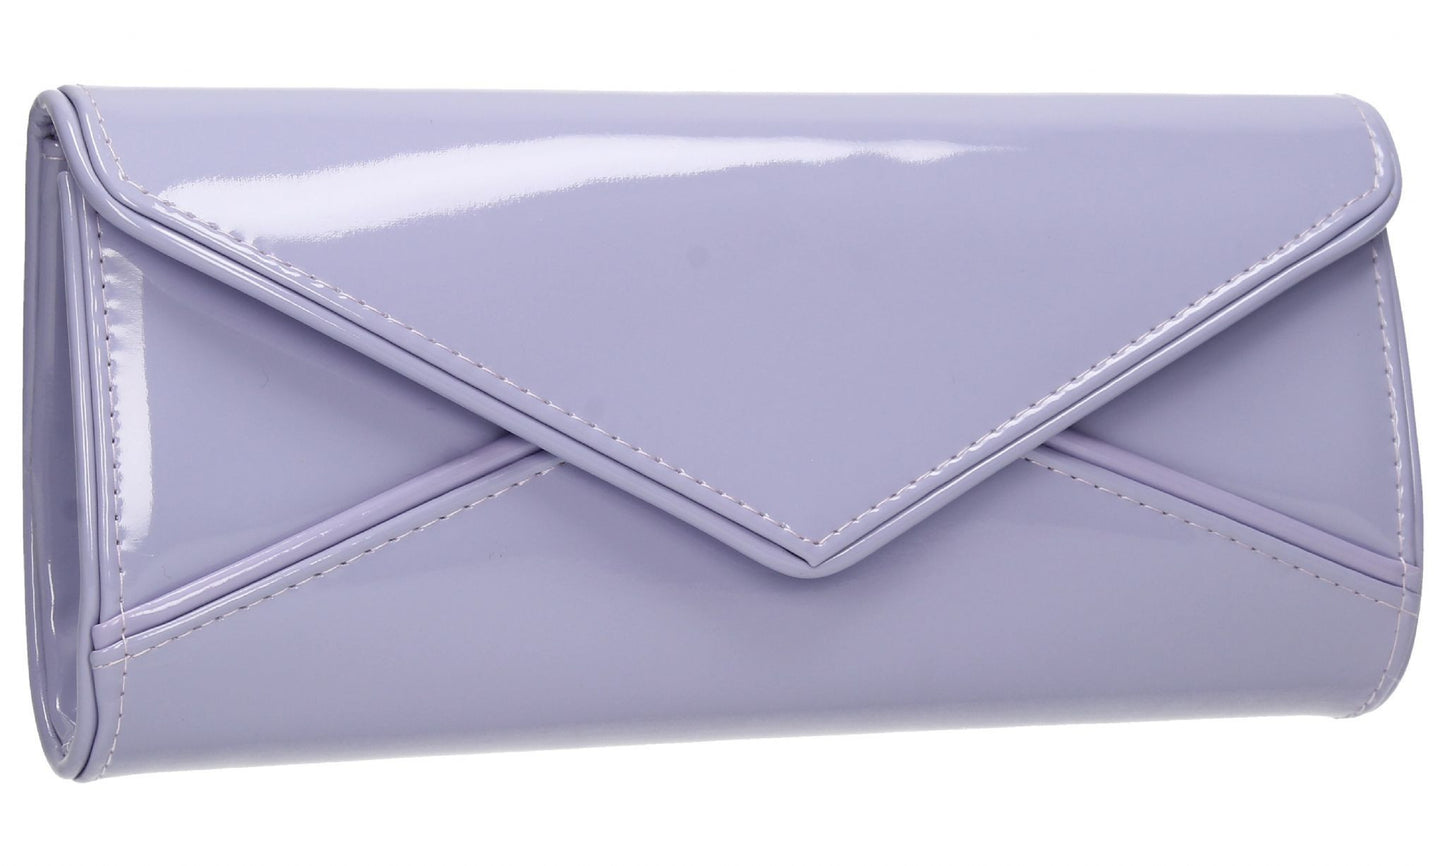 SWANKYSWANS Perry Patent Clutch Bag - Lilac Cute Cheap Clutch Bag For Weddings School and Work